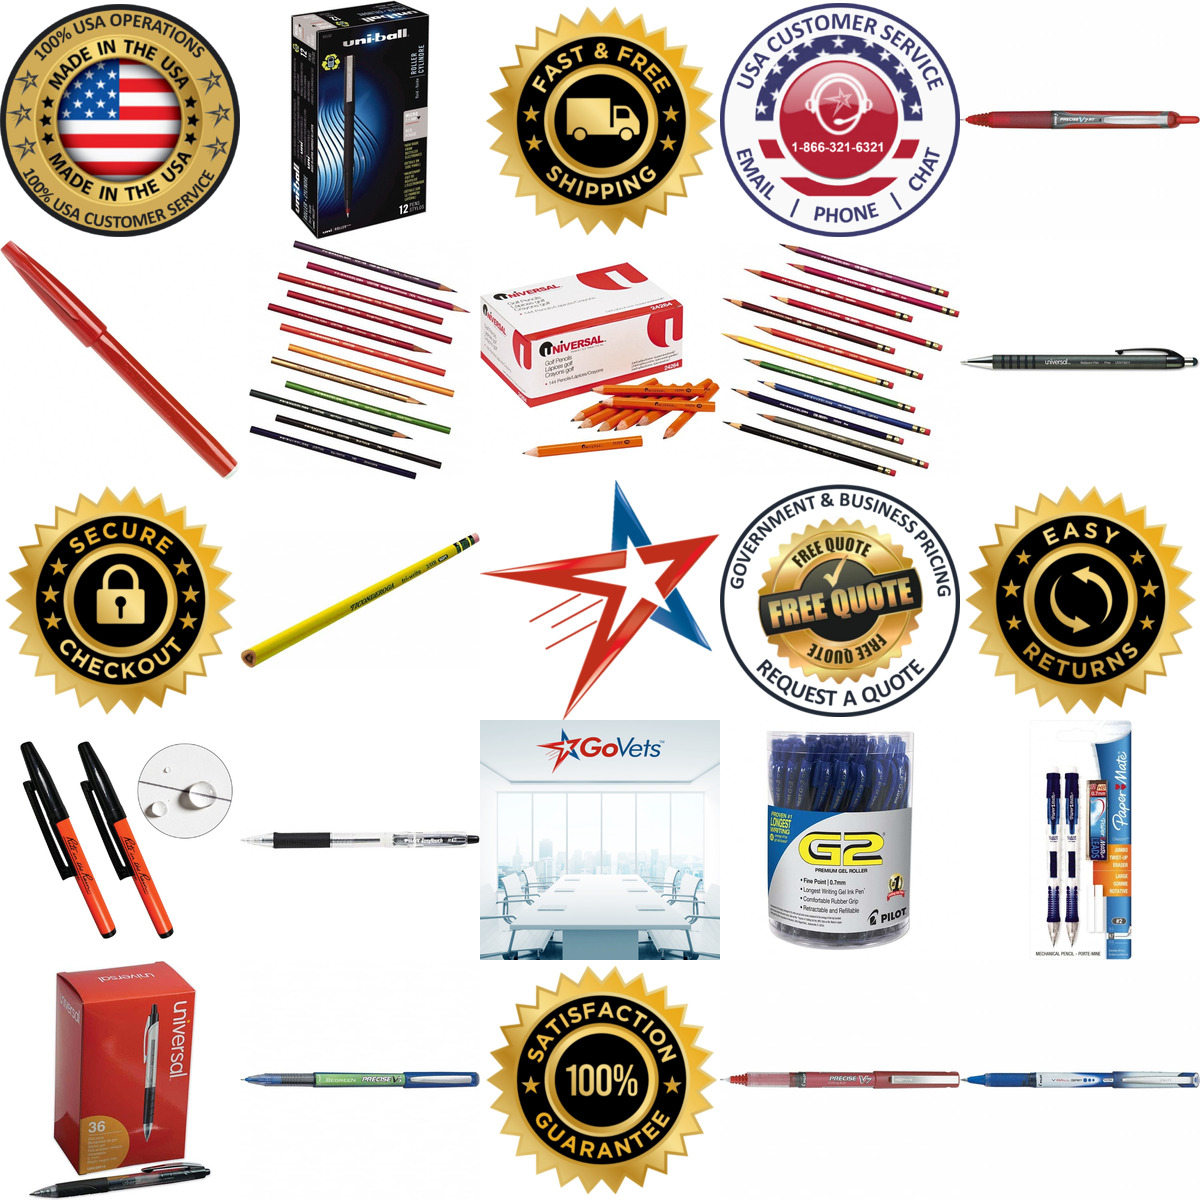 A selection of Pens and Pencils products on GoVets